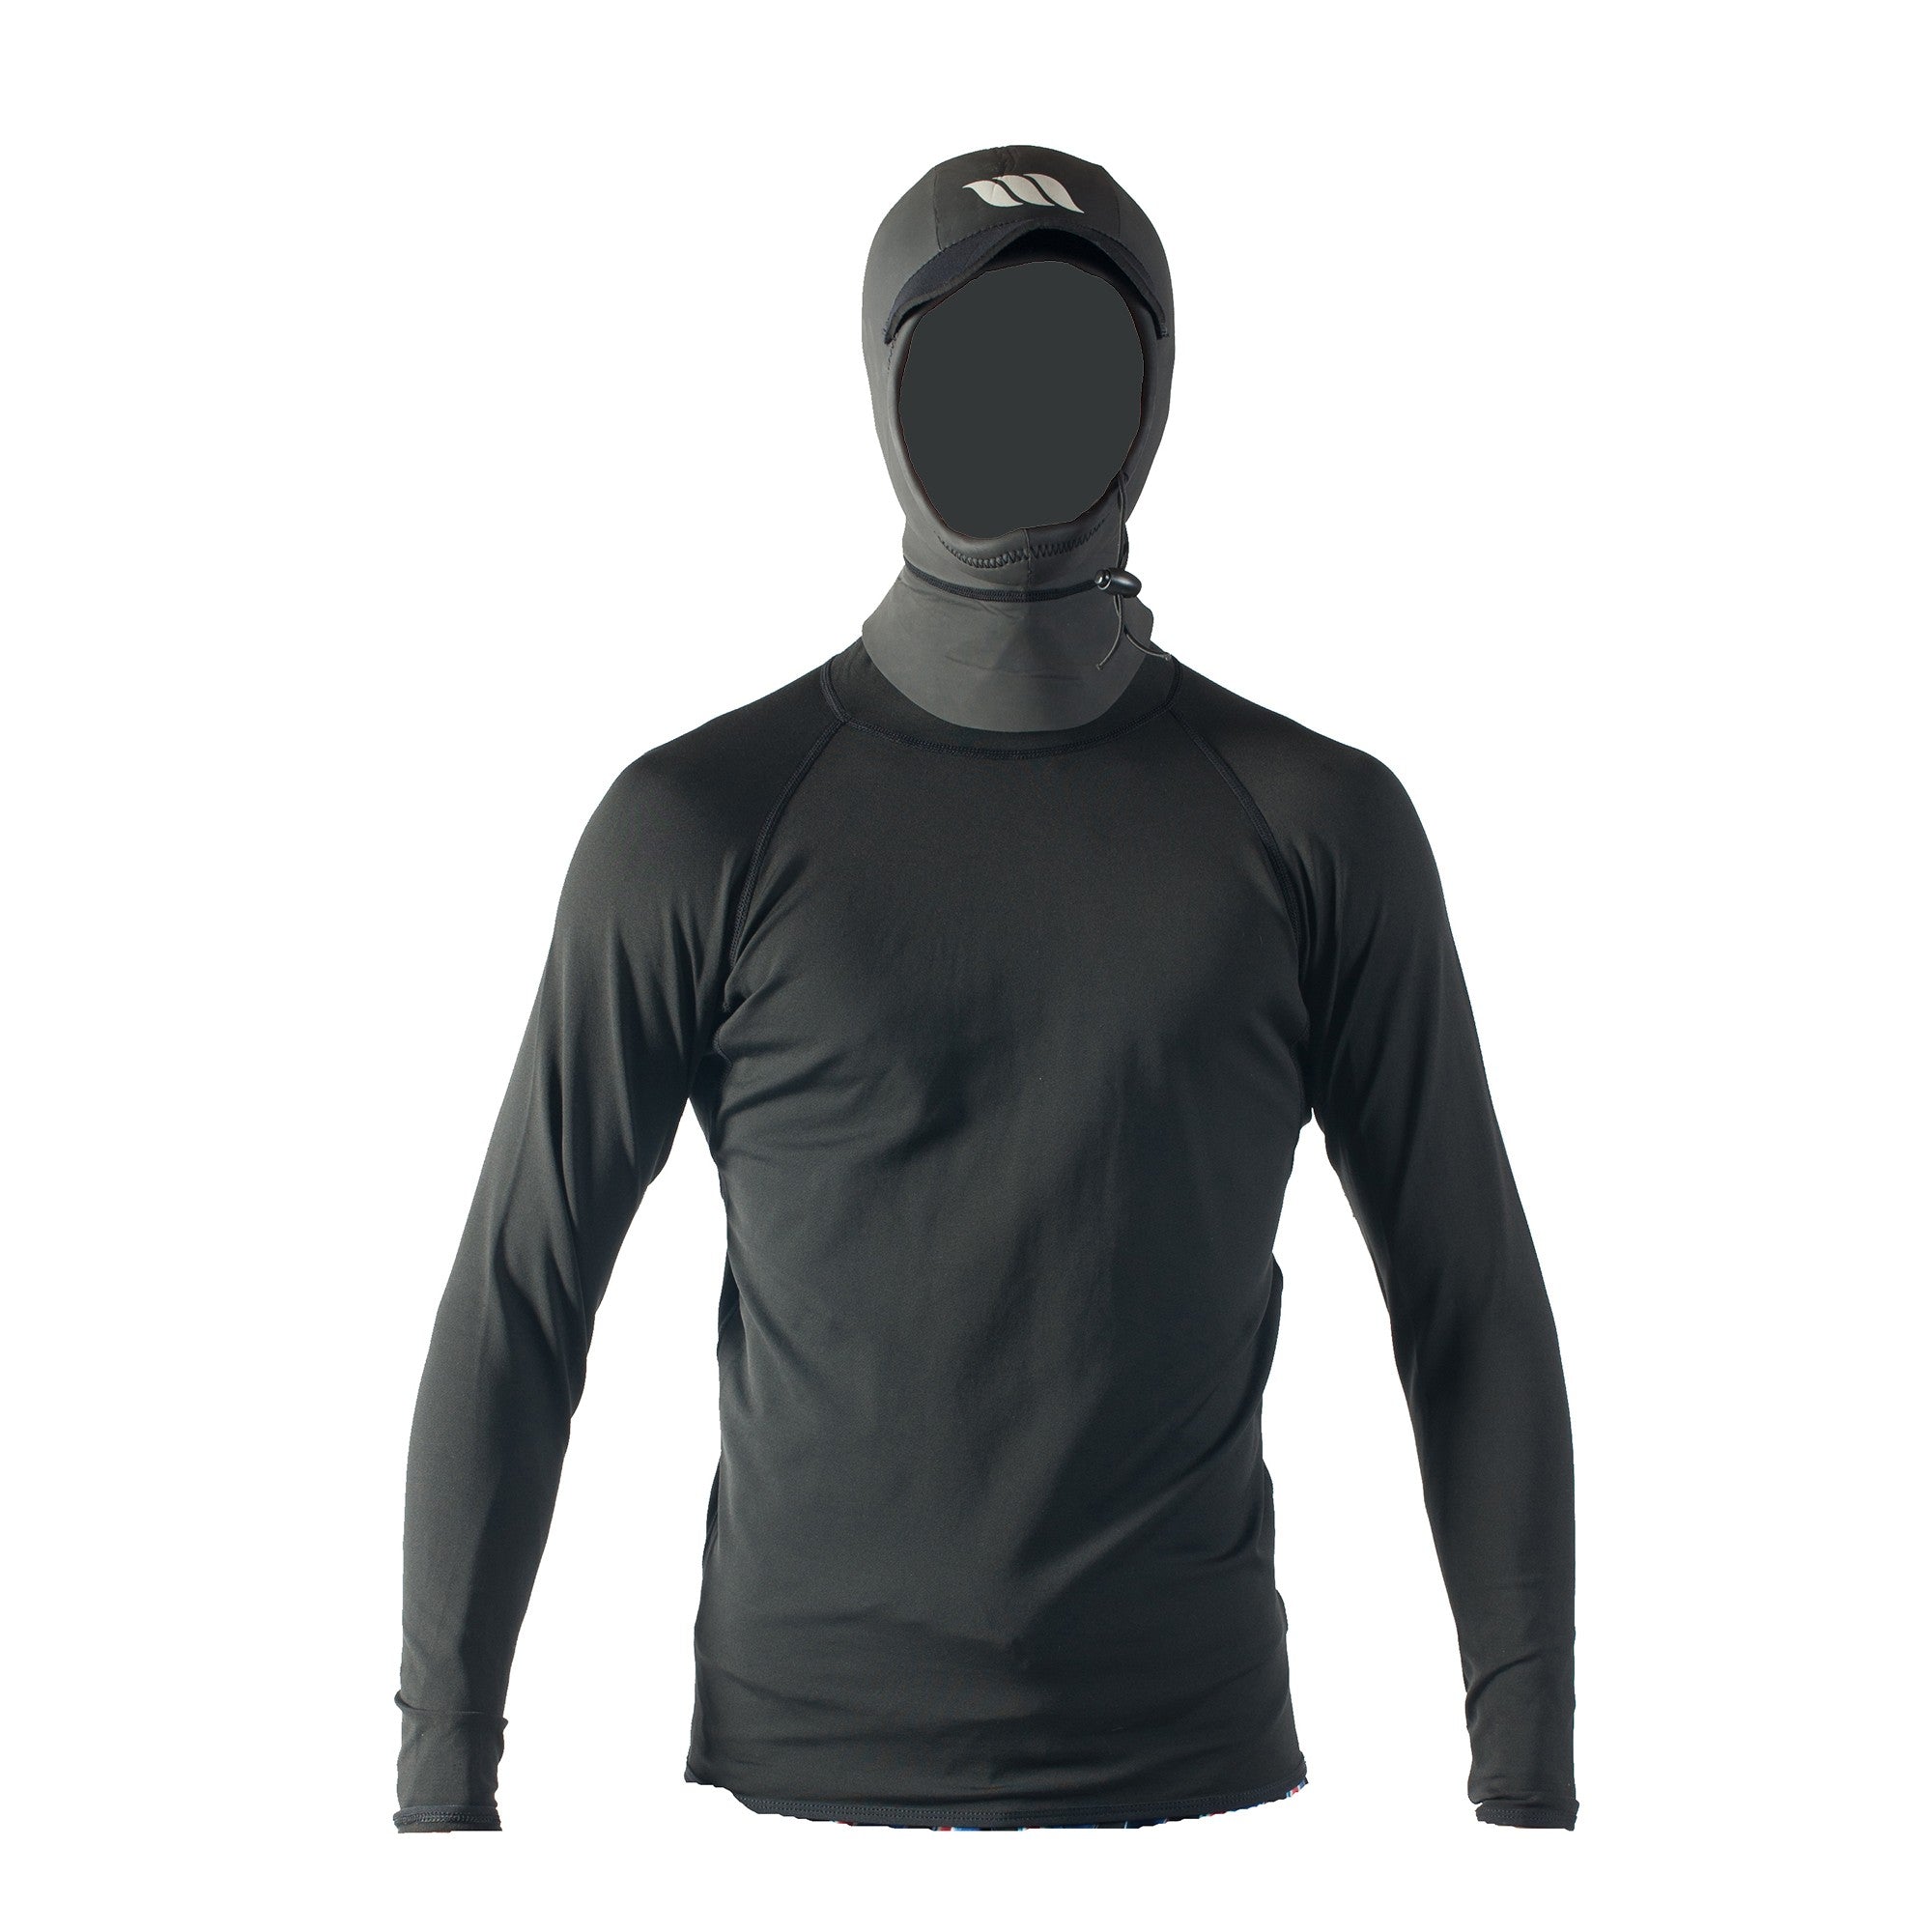 WEST - Polypro Top with Surf Hood - Full Hood 4mm